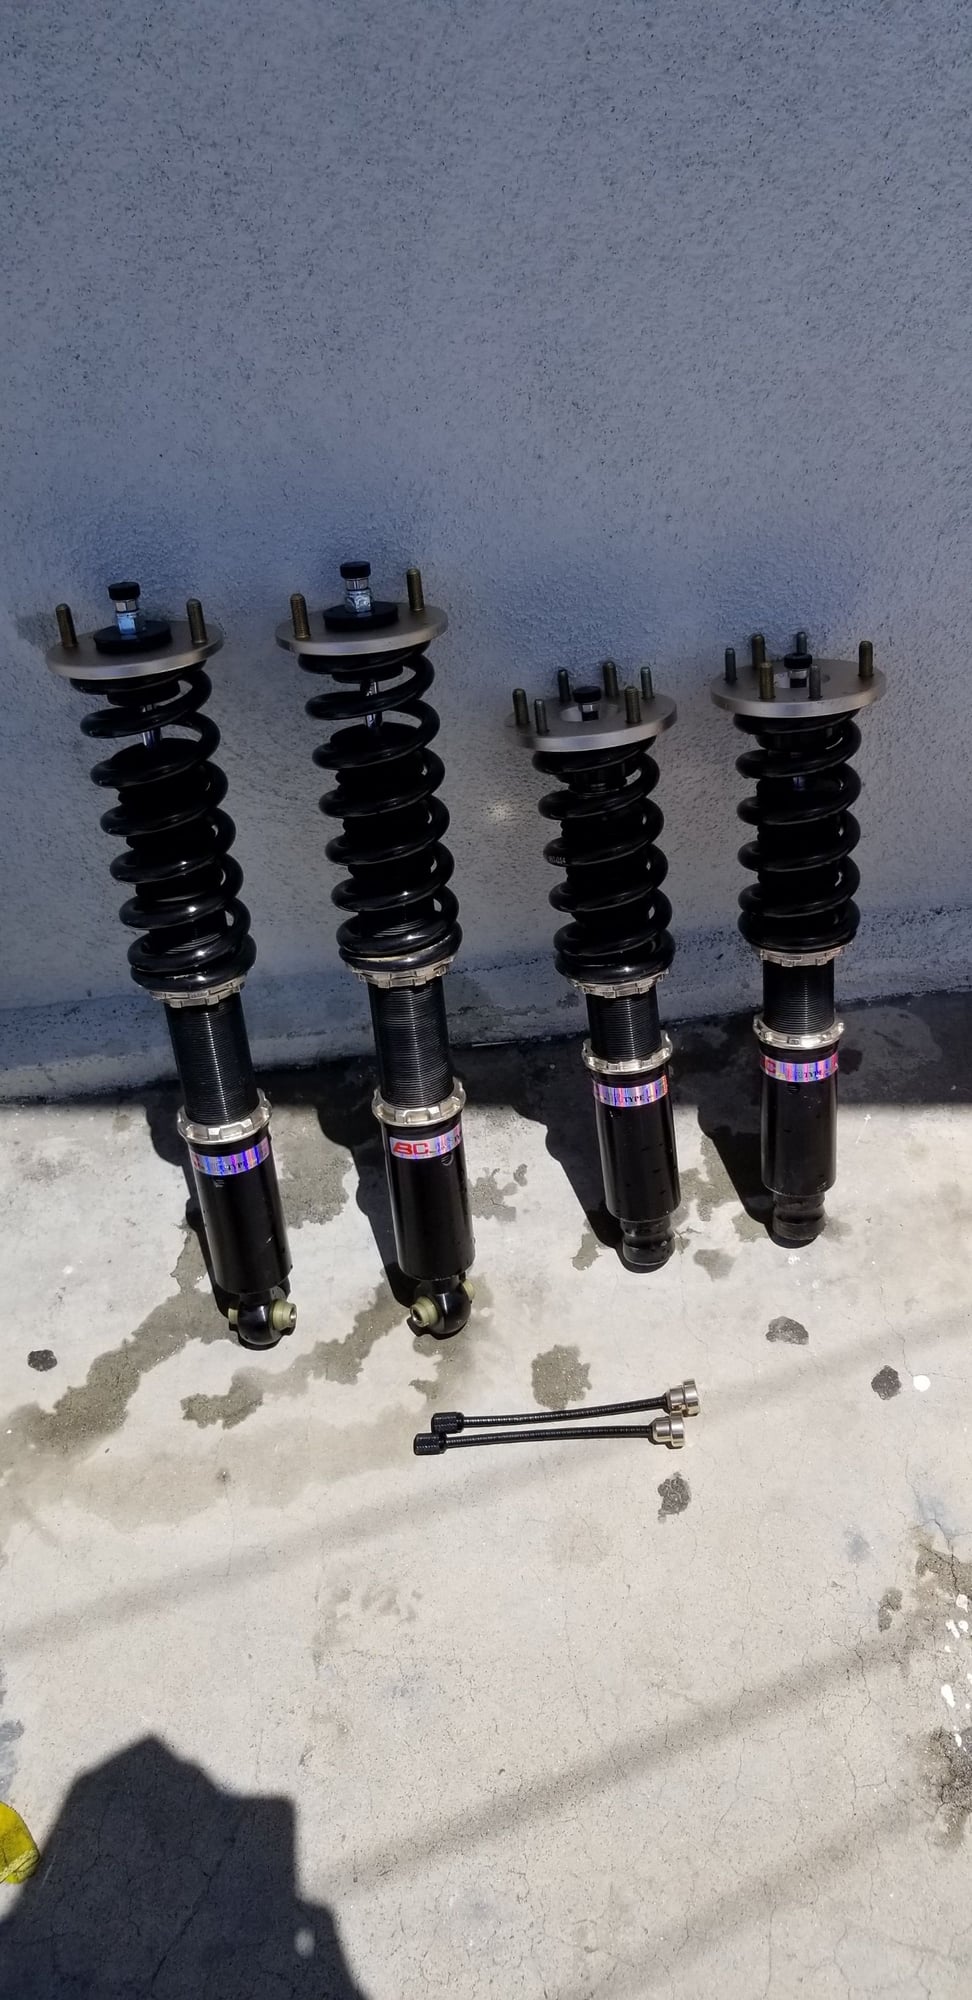 Miscellaneous - FS: 3G aftermarket suspension parts / Enkei RPF1 - Used - 2004 to 2008 Acura TL - Westminster, CA 92683, United States